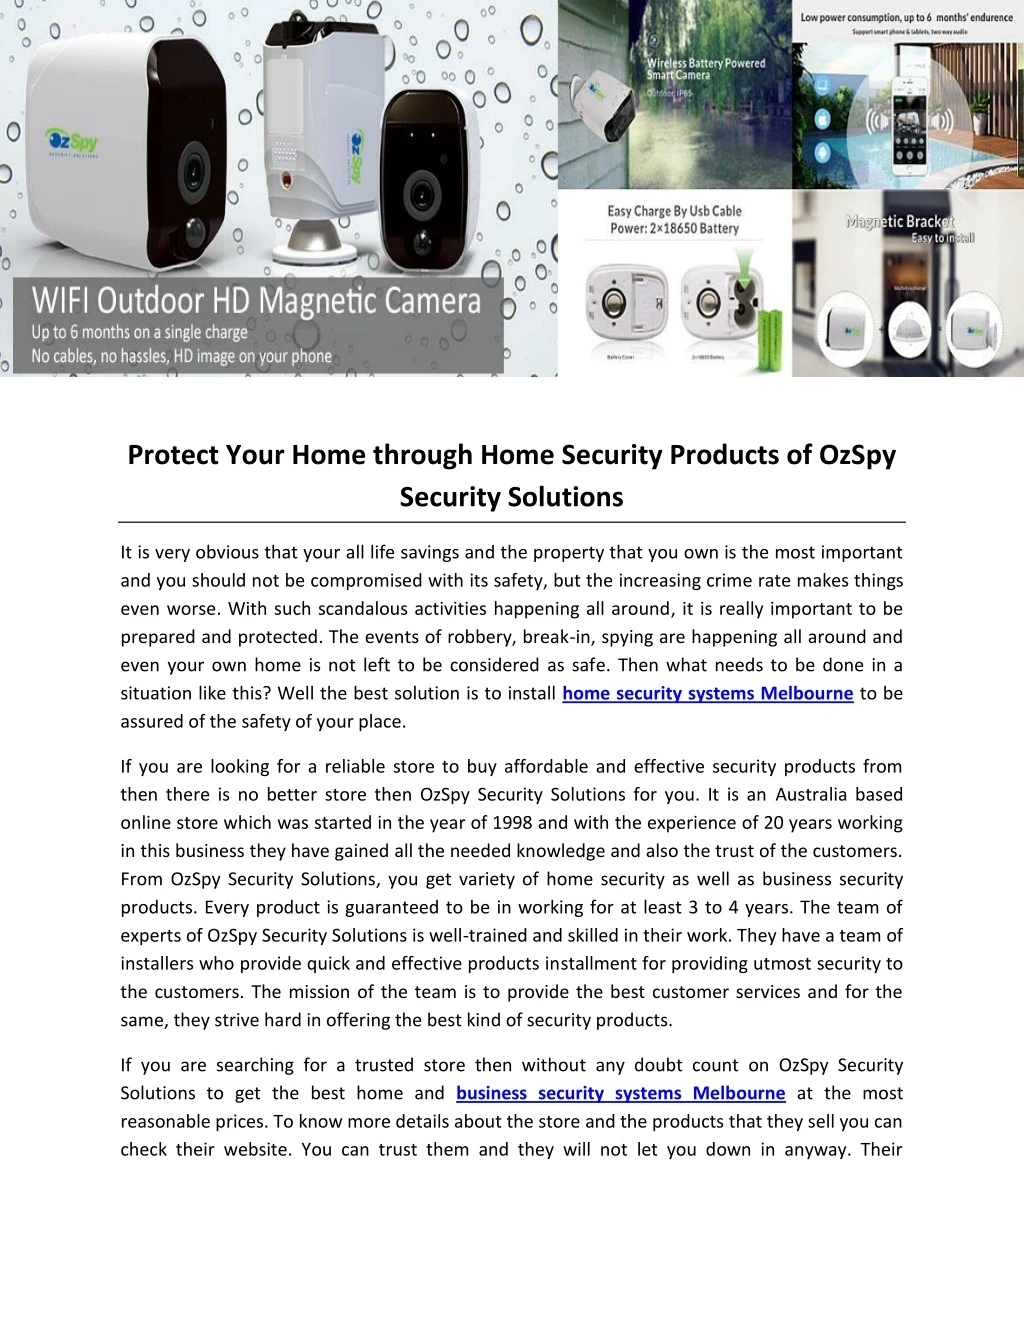 protect your home through home security products